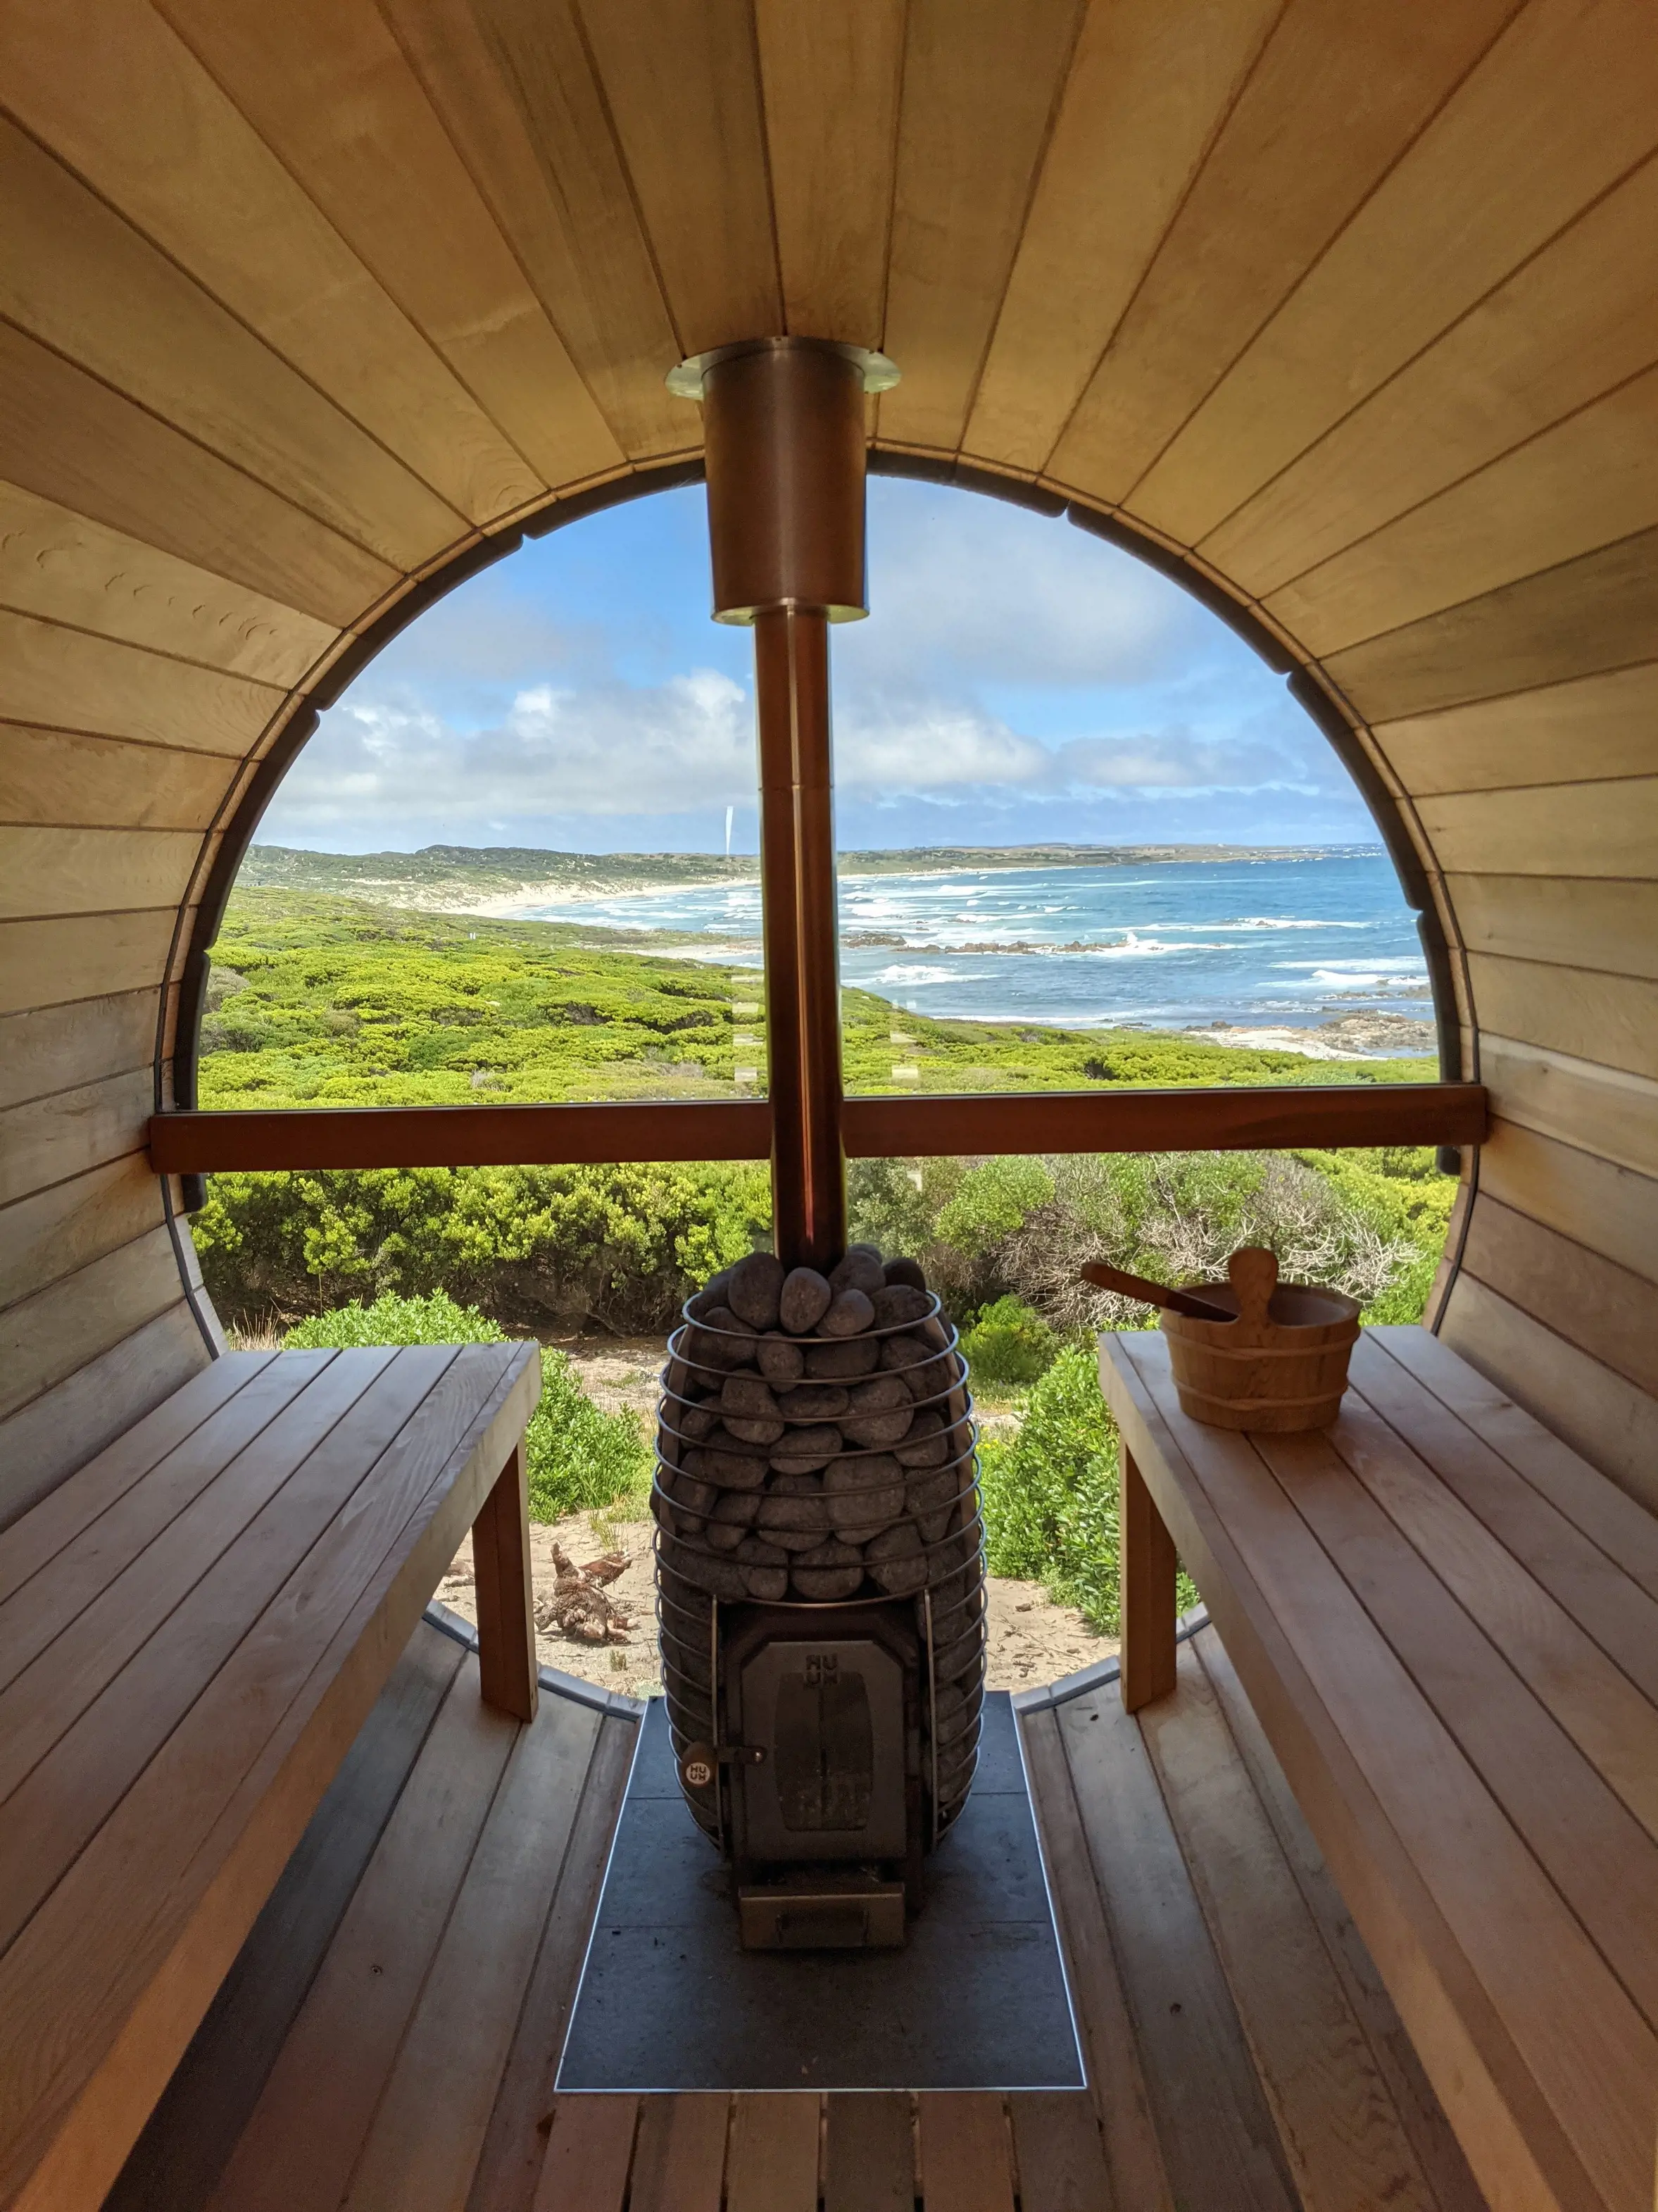 A circular sauna with a central wood fired heater and large circular window looking out over coastal heath and a beach.